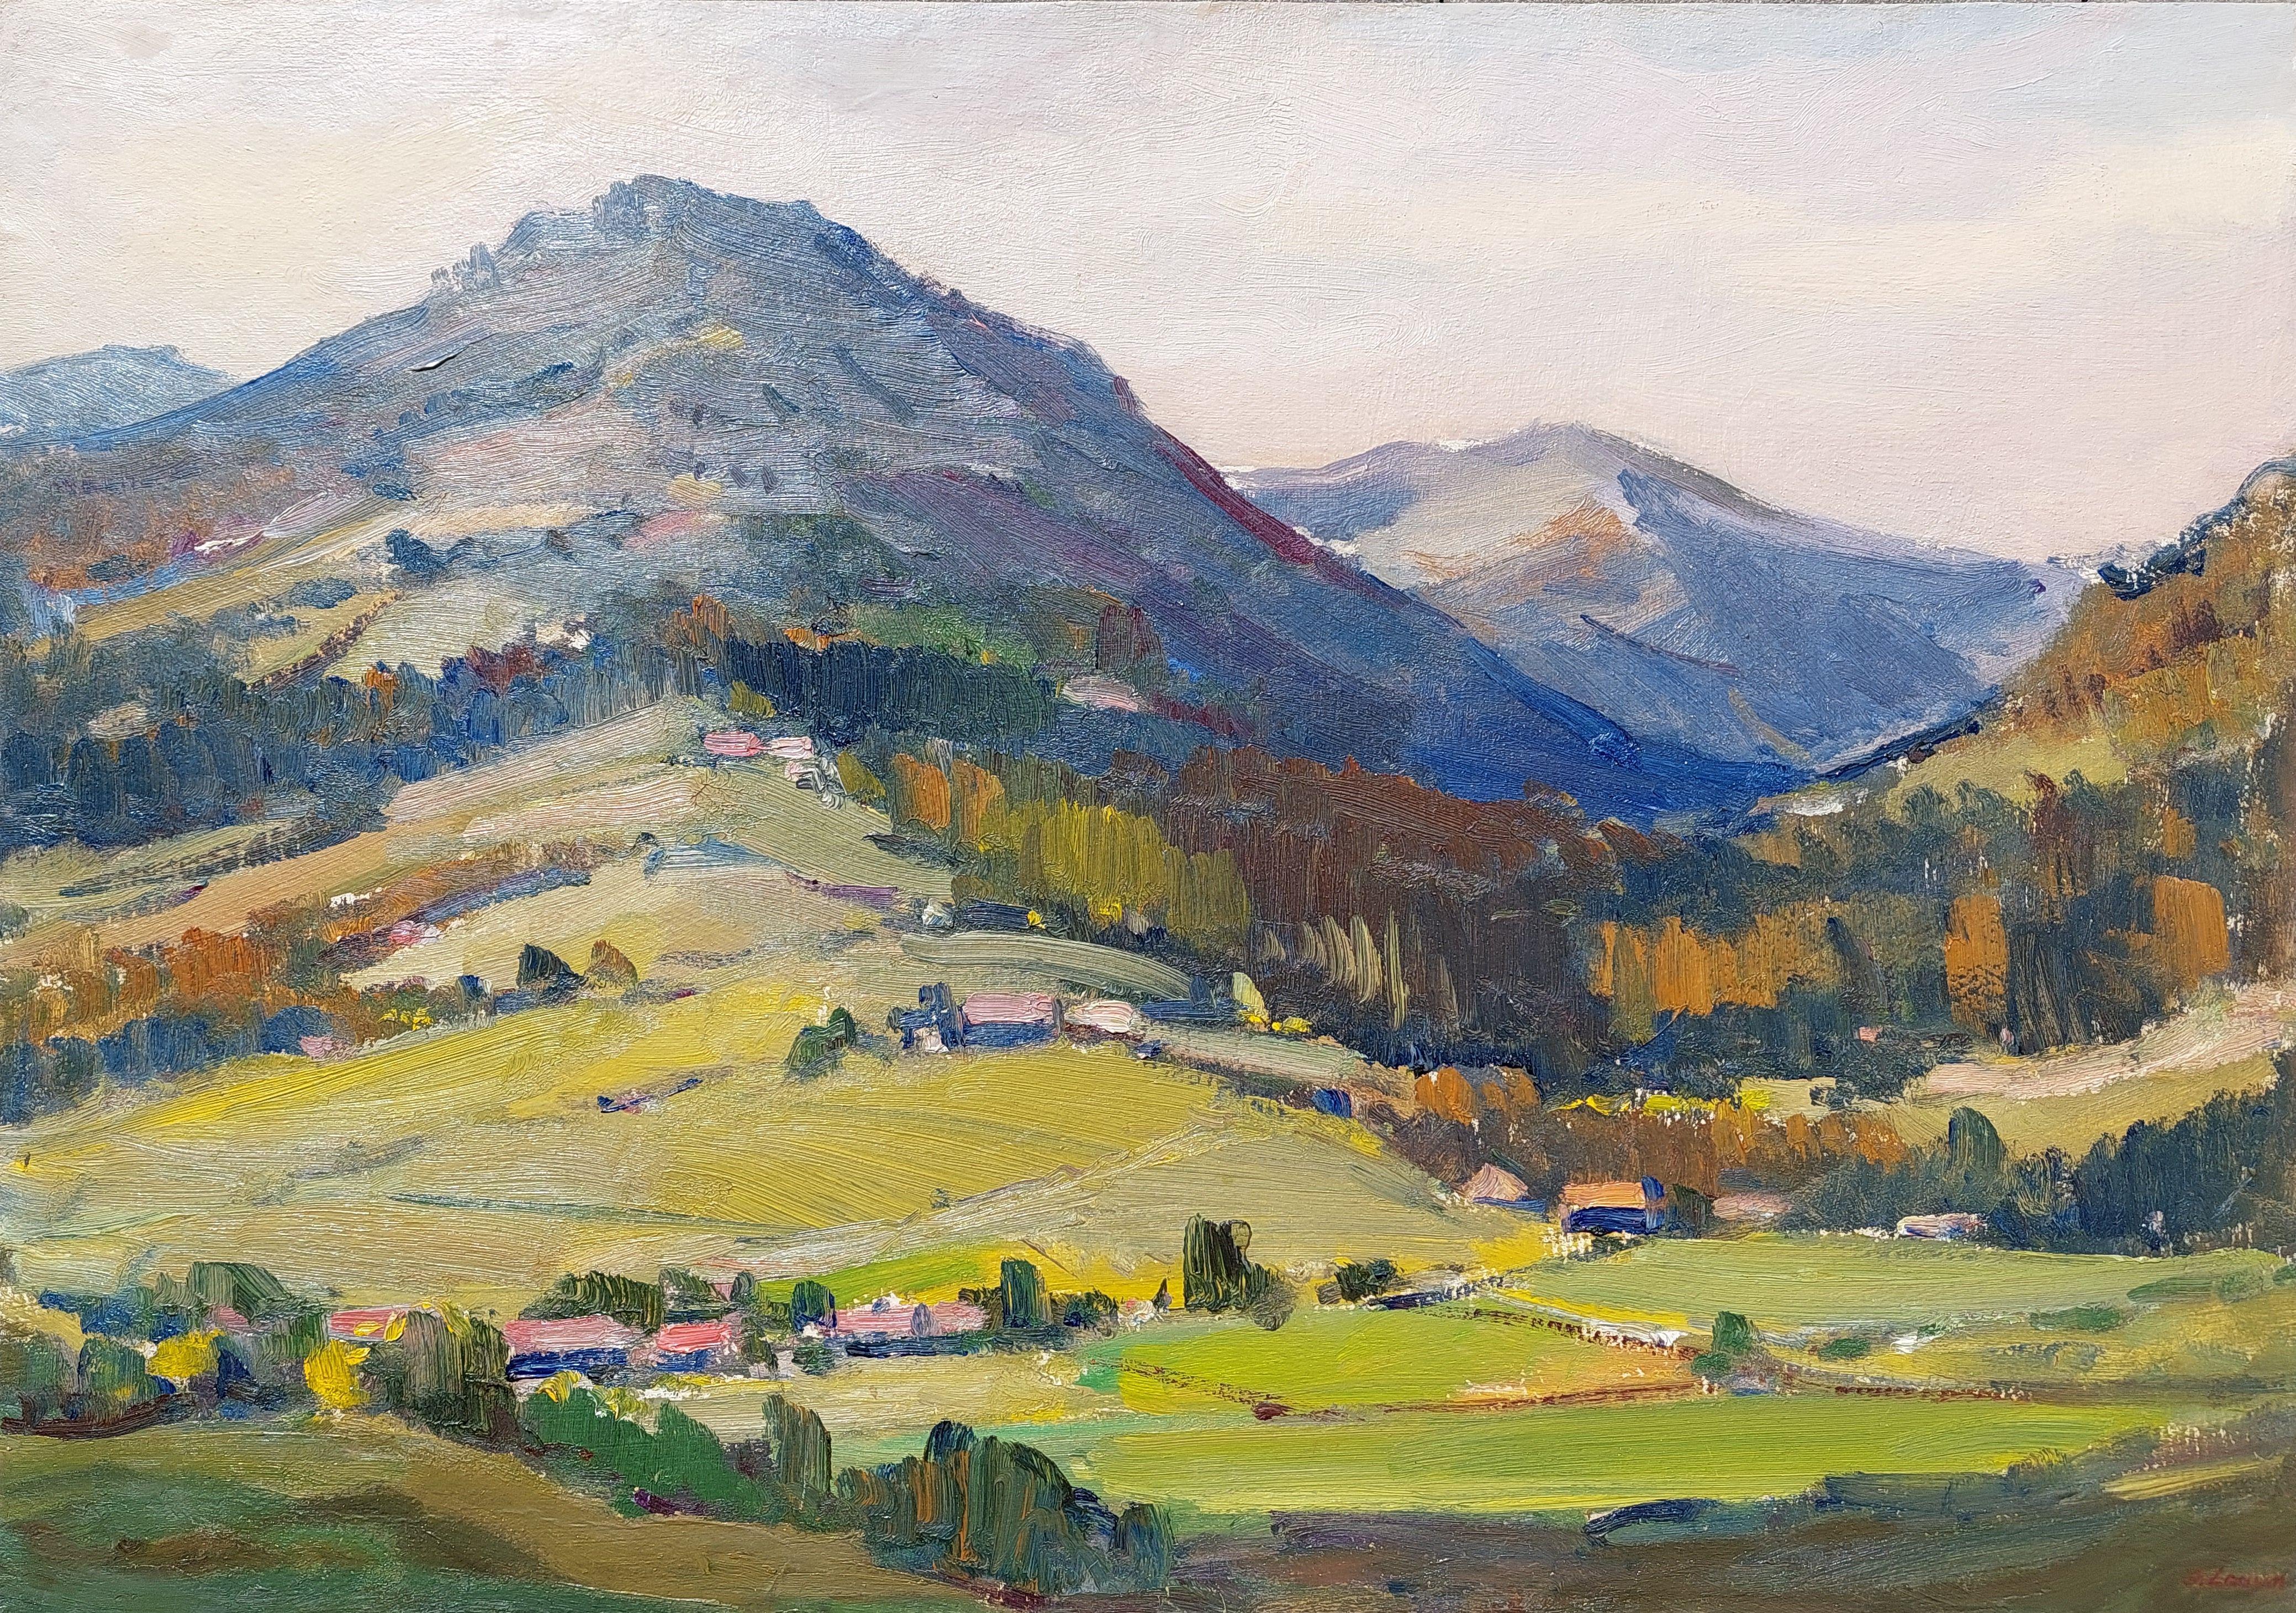 Mountain landscape with a village. 1980. Cardboard, oil. 49,5x70cm

In this work artist paid attention to infinite landscape depiction of mountains in summertime. Mountains are thought to contain divine inspiration in many forms, and are the focus